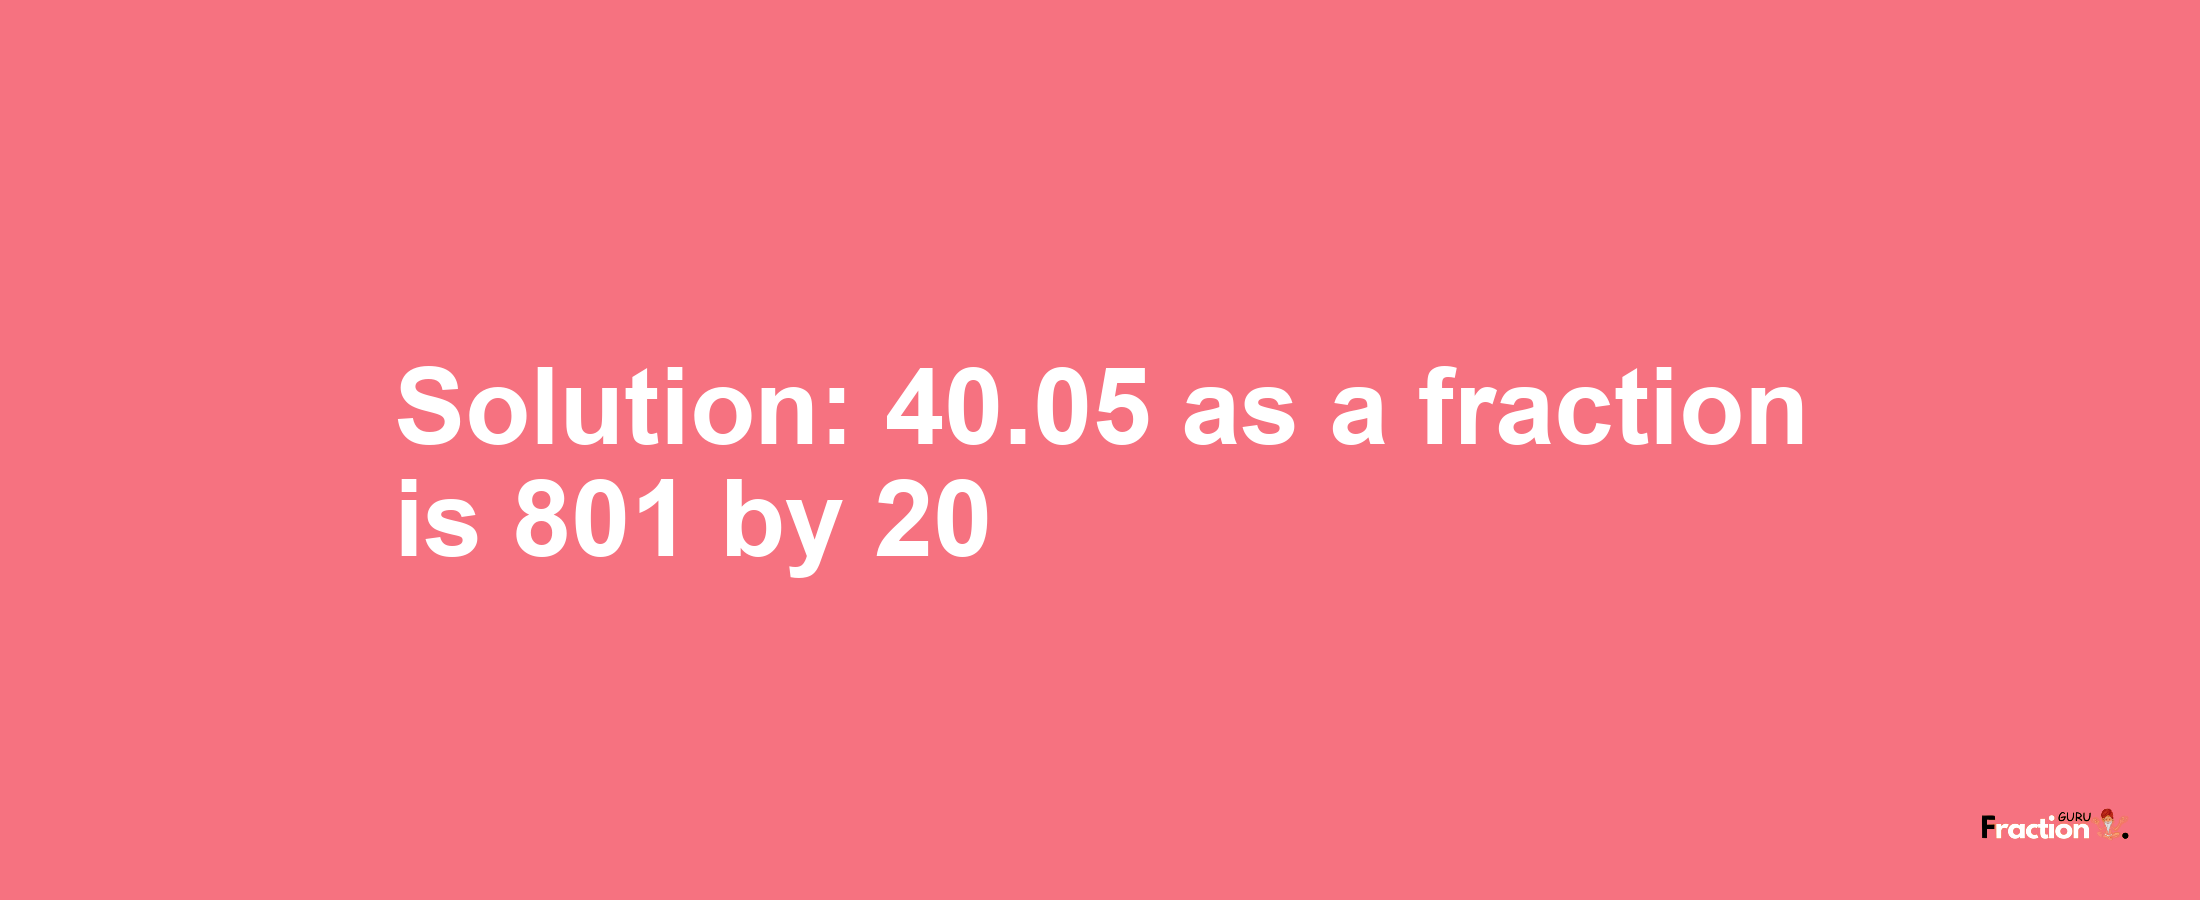 Solution:40.05 as a fraction is 801/20